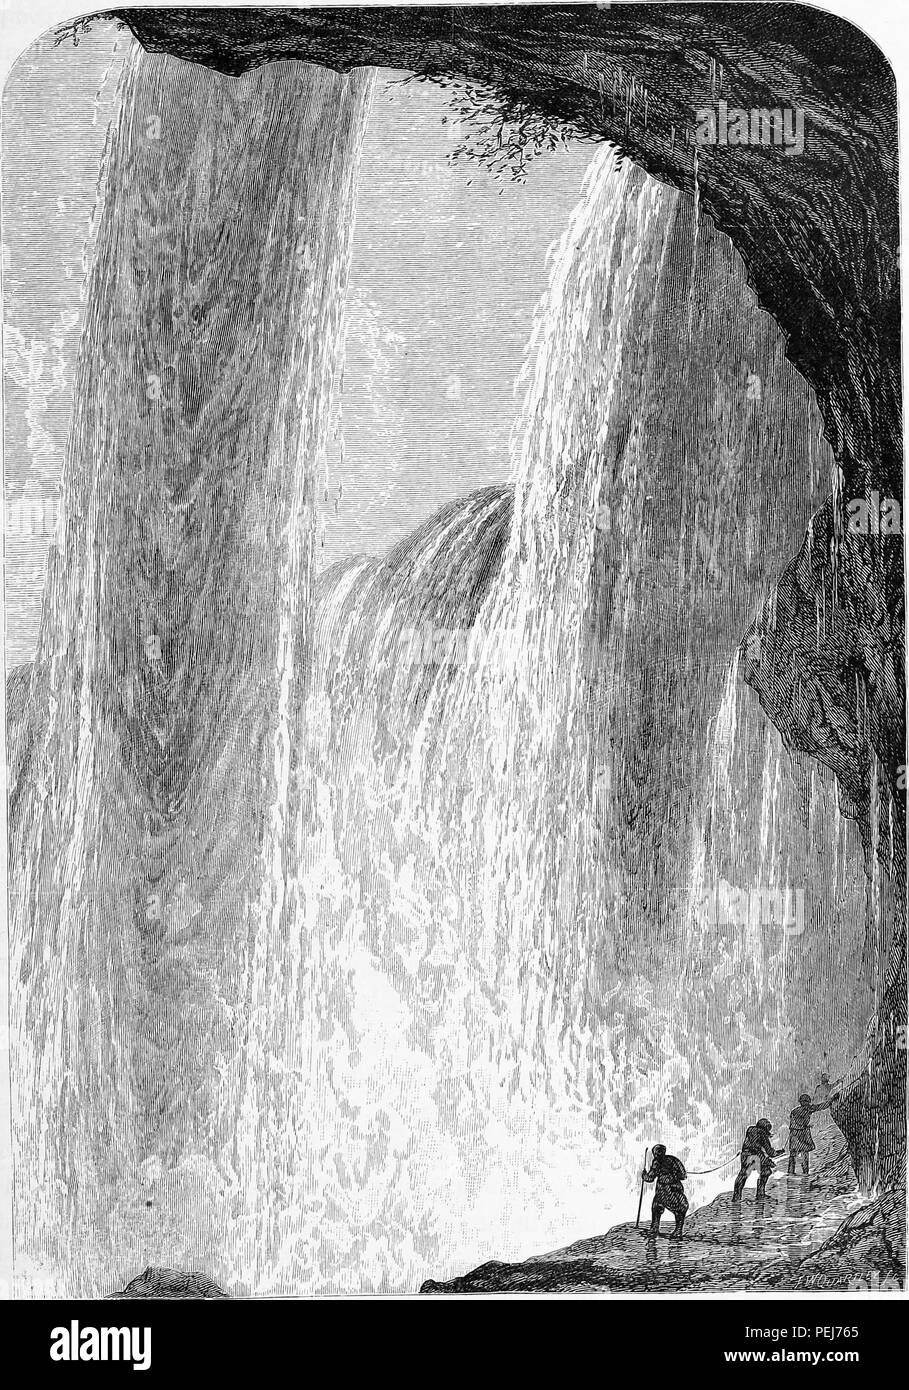 Black and white vintage print depicting several people, tied together with rope at their waists, hiking up a rock ledge underneath the falls on the Canadian side of the Niagara Waterfalls, published in William Cullen Bryant's edited volume 'Picturesque America; or, The Land We Live In', 1872. Courtesy Internet Archive. () Stock Photo